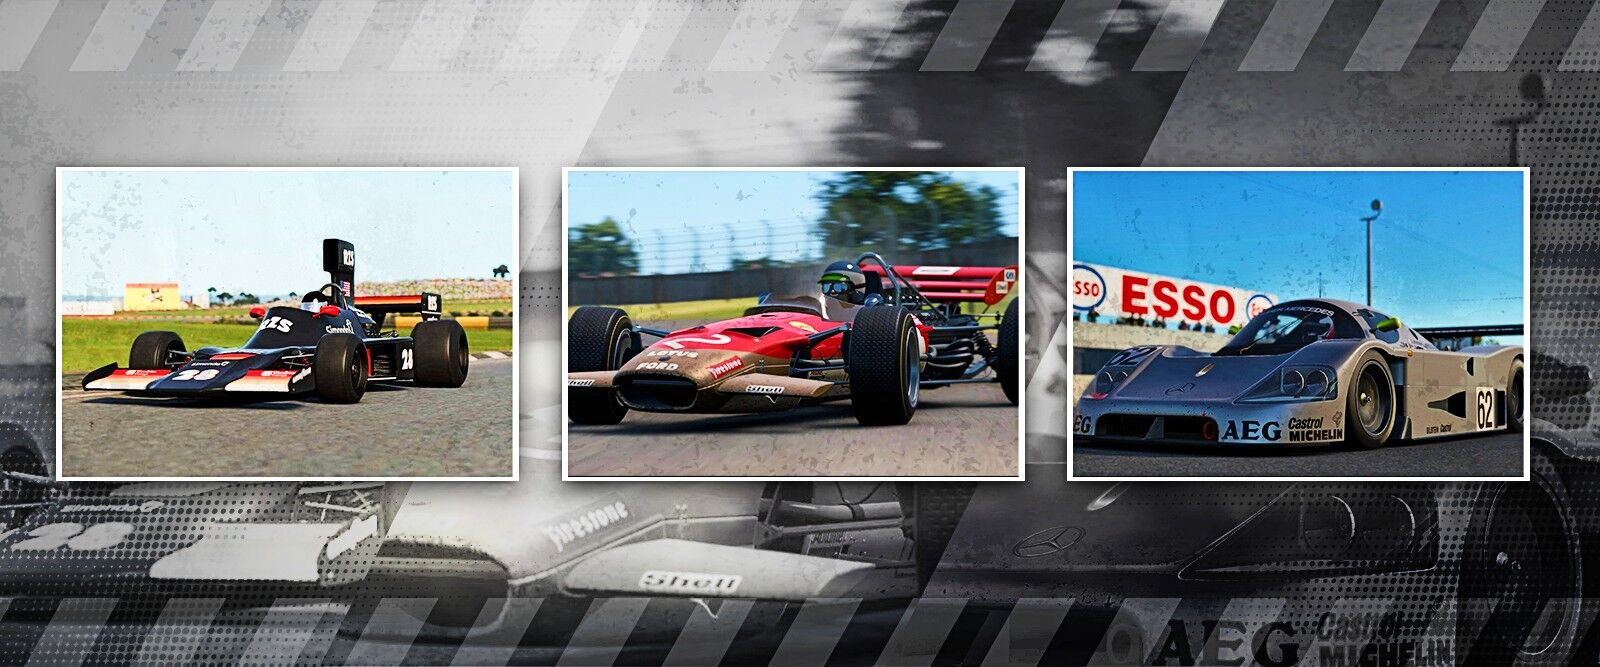 An image of three different classic cars in Automobilista 2.